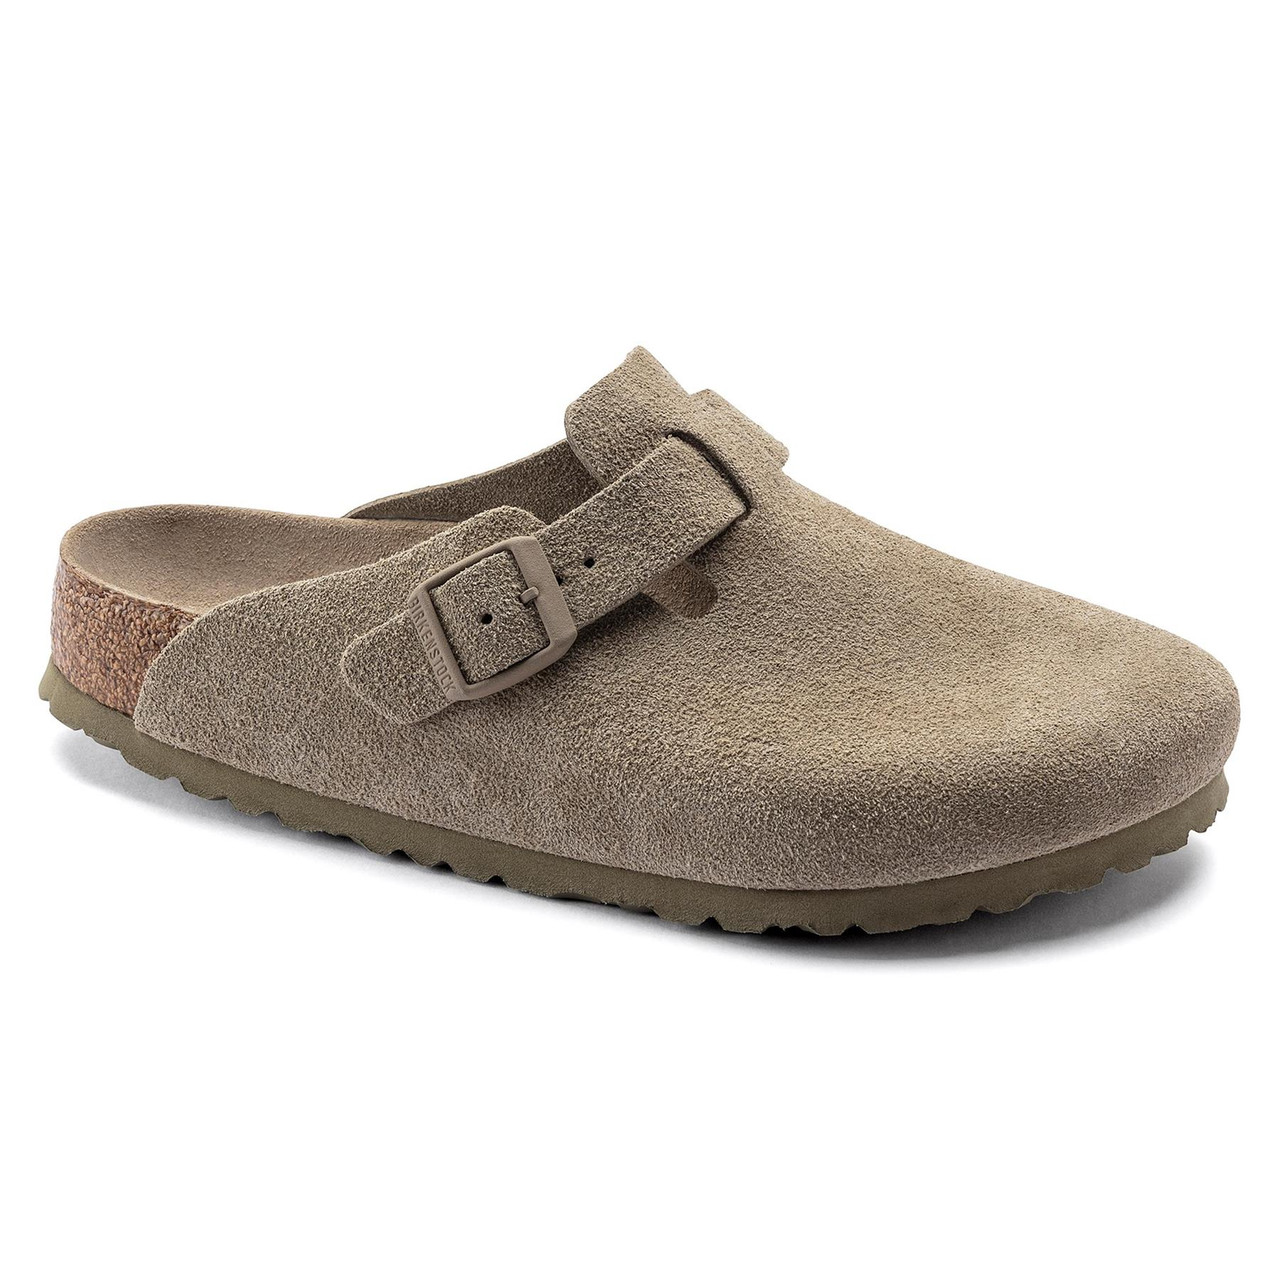 What is the purpose of the suede lining in the Birkenstock Boston Soft Footbed Suede Leather Clog?